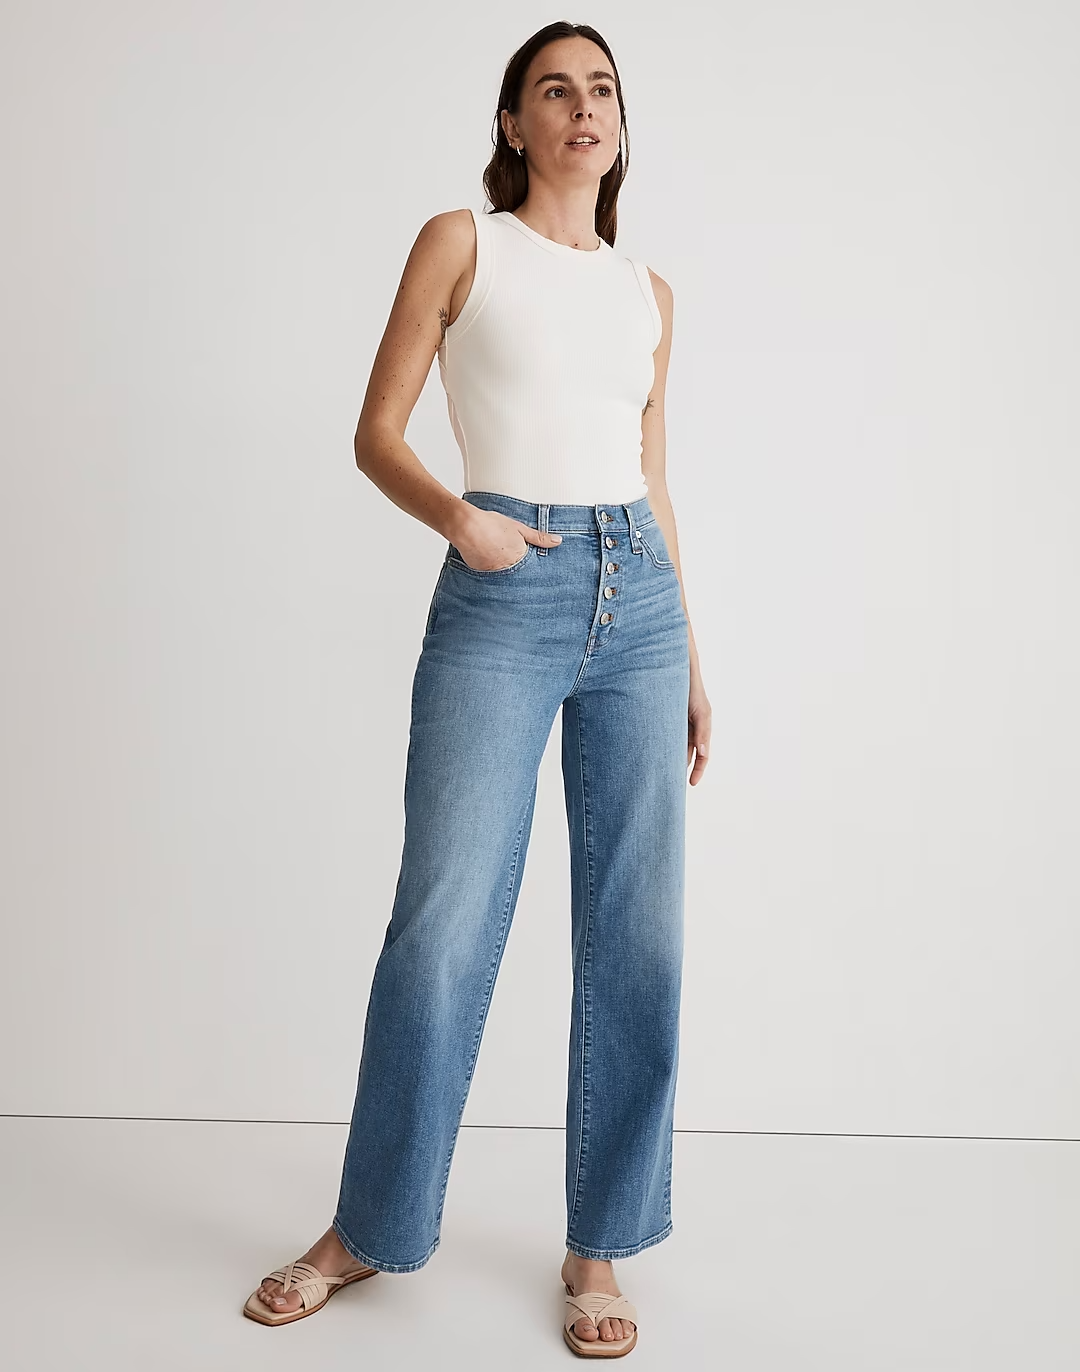 Madewell + The Perfect Vintage Wide-Leg Jean in Ohlman Wash